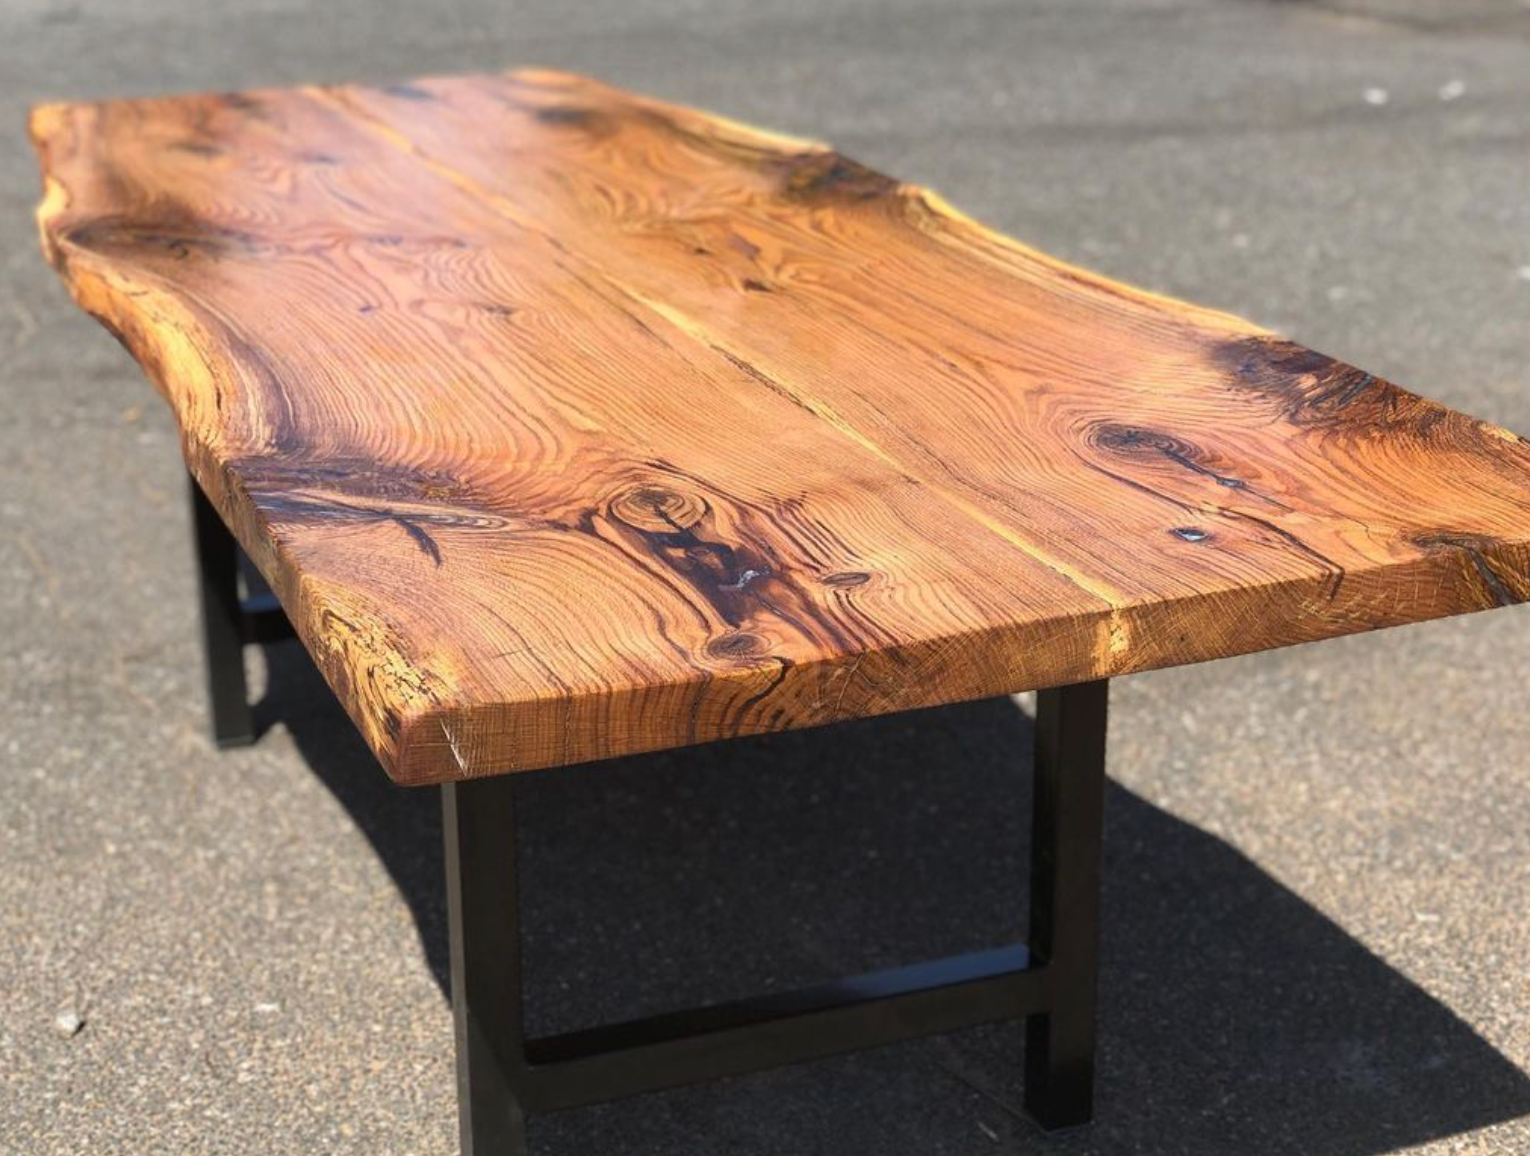 Live Edge White Oak Jointed Dining Table